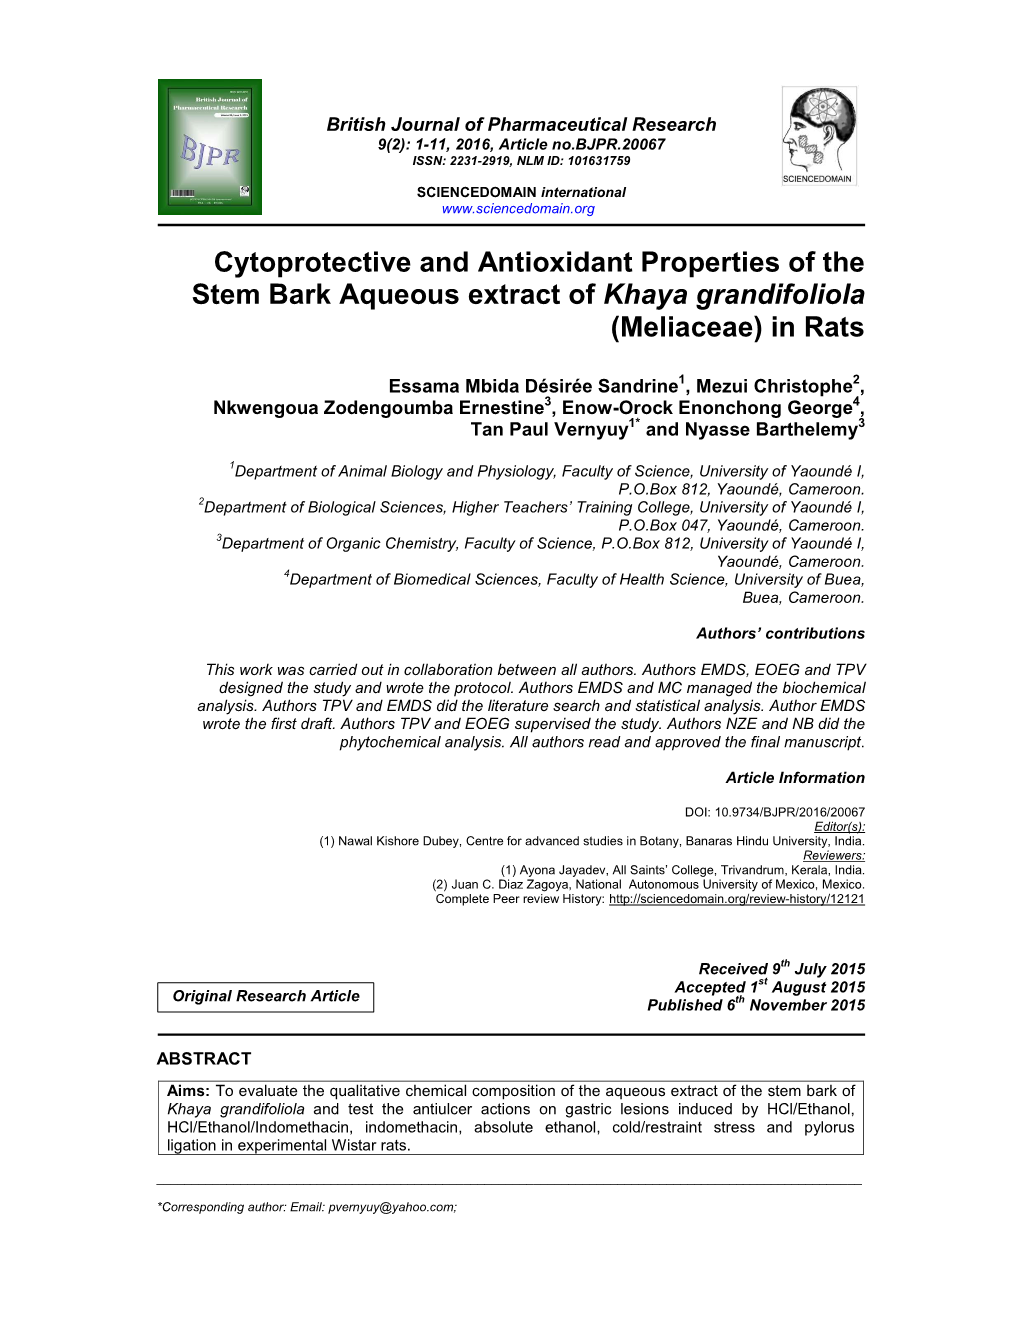 Cytoprotective and Antioxidant Properties of the Stem Bark Aqueous Extract of Khaya Grandifoliola (Meliaceae) in Rats